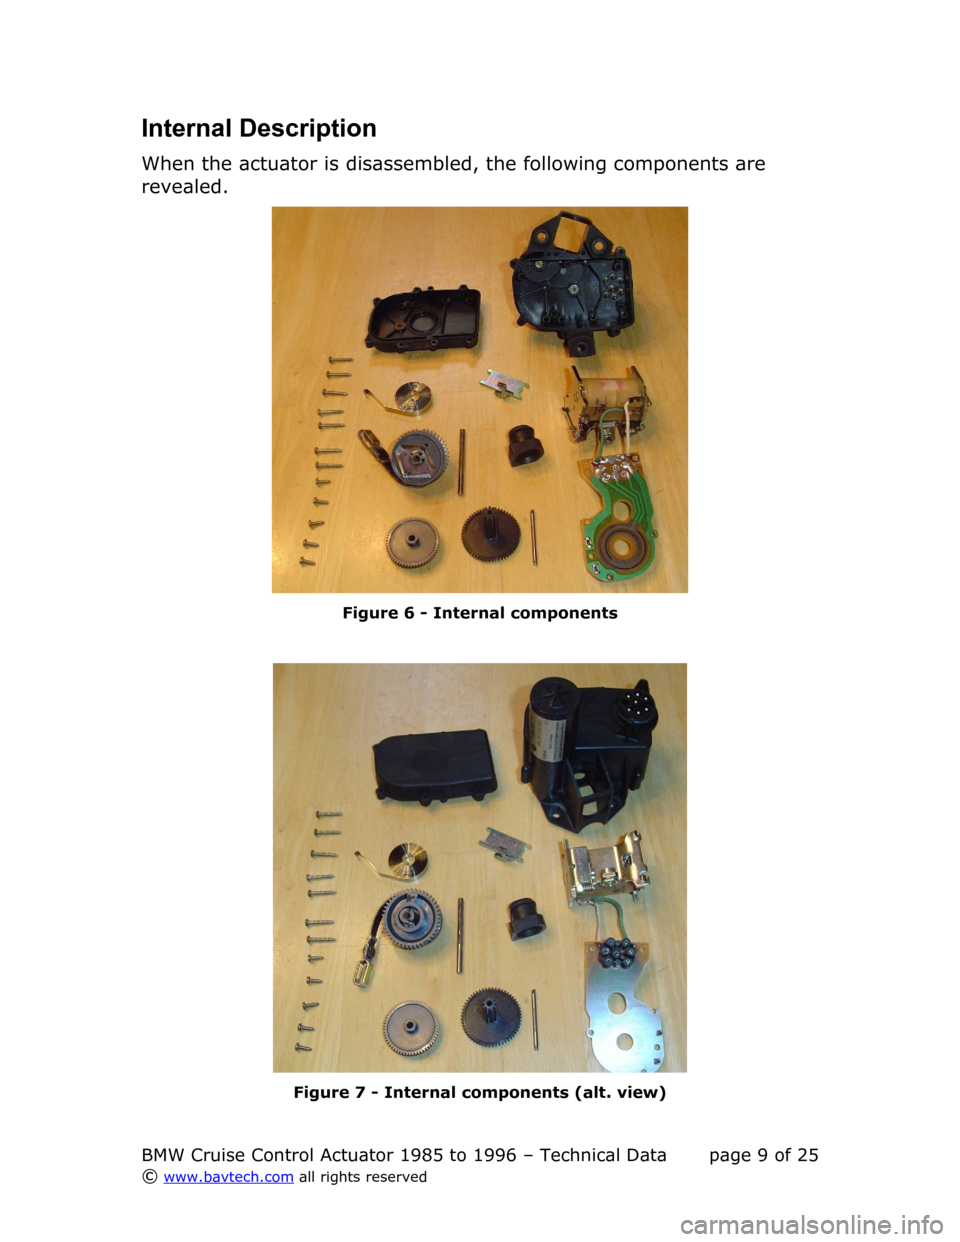 BMW 8 SERIES 1995 E31 Cruise Control Acutator Internal Description
When the actuator is disassembled, the following components are  
revealed.
Figure  6  - Internal components
Figure  7  - Internal components (alt. view)
BMW Cruise Control Actuat